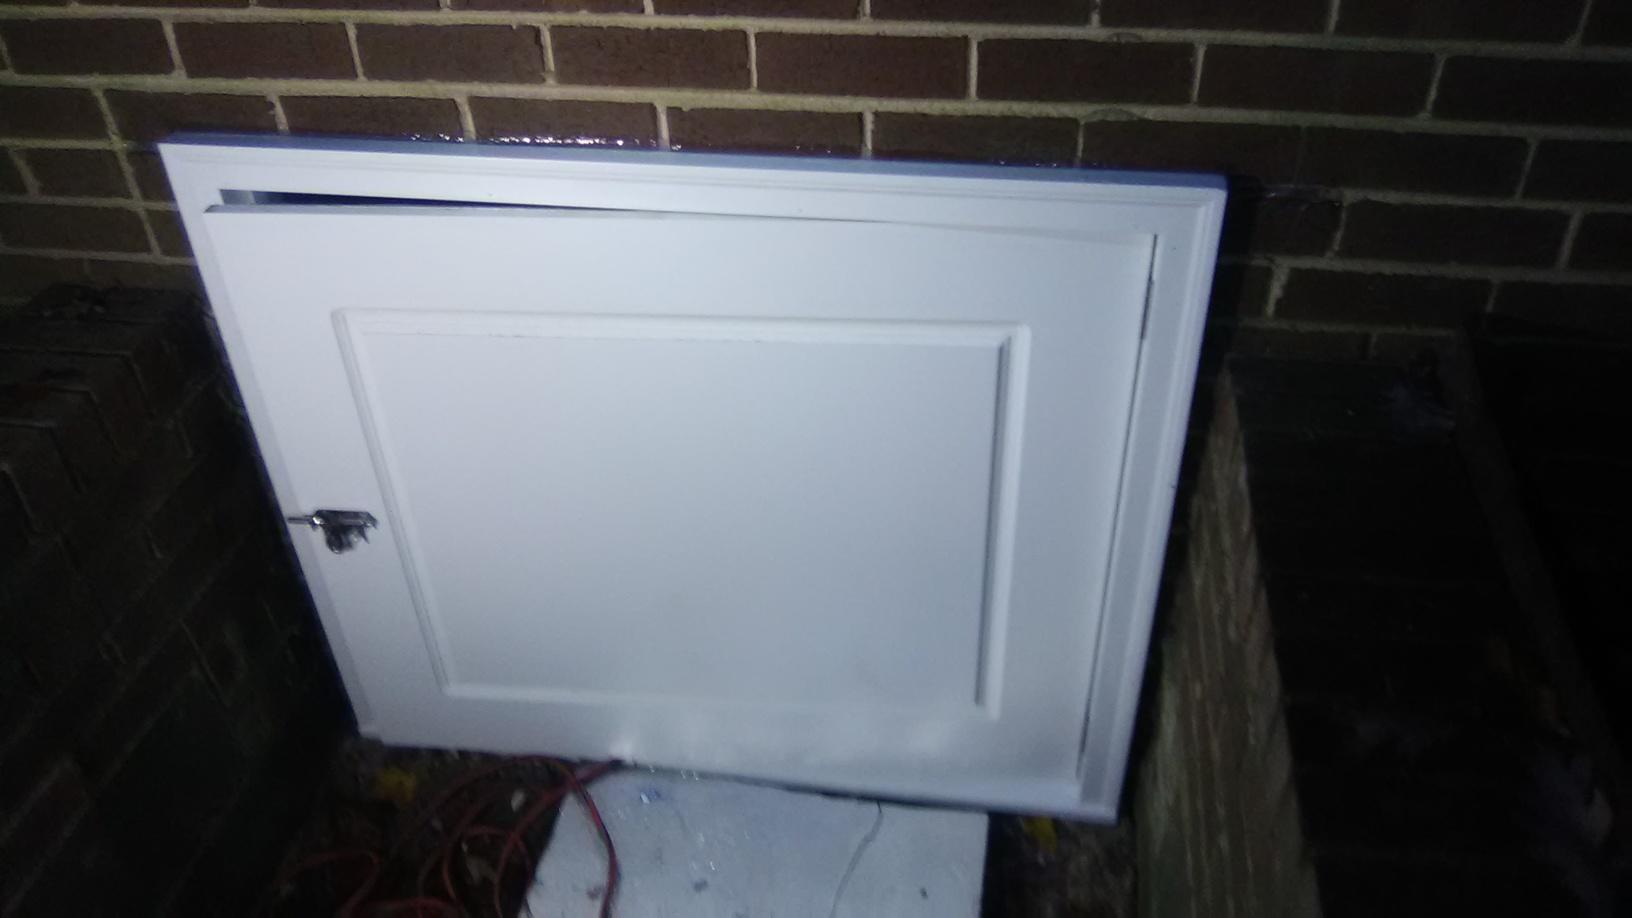 Crawl Space Door Added for Easy Entry